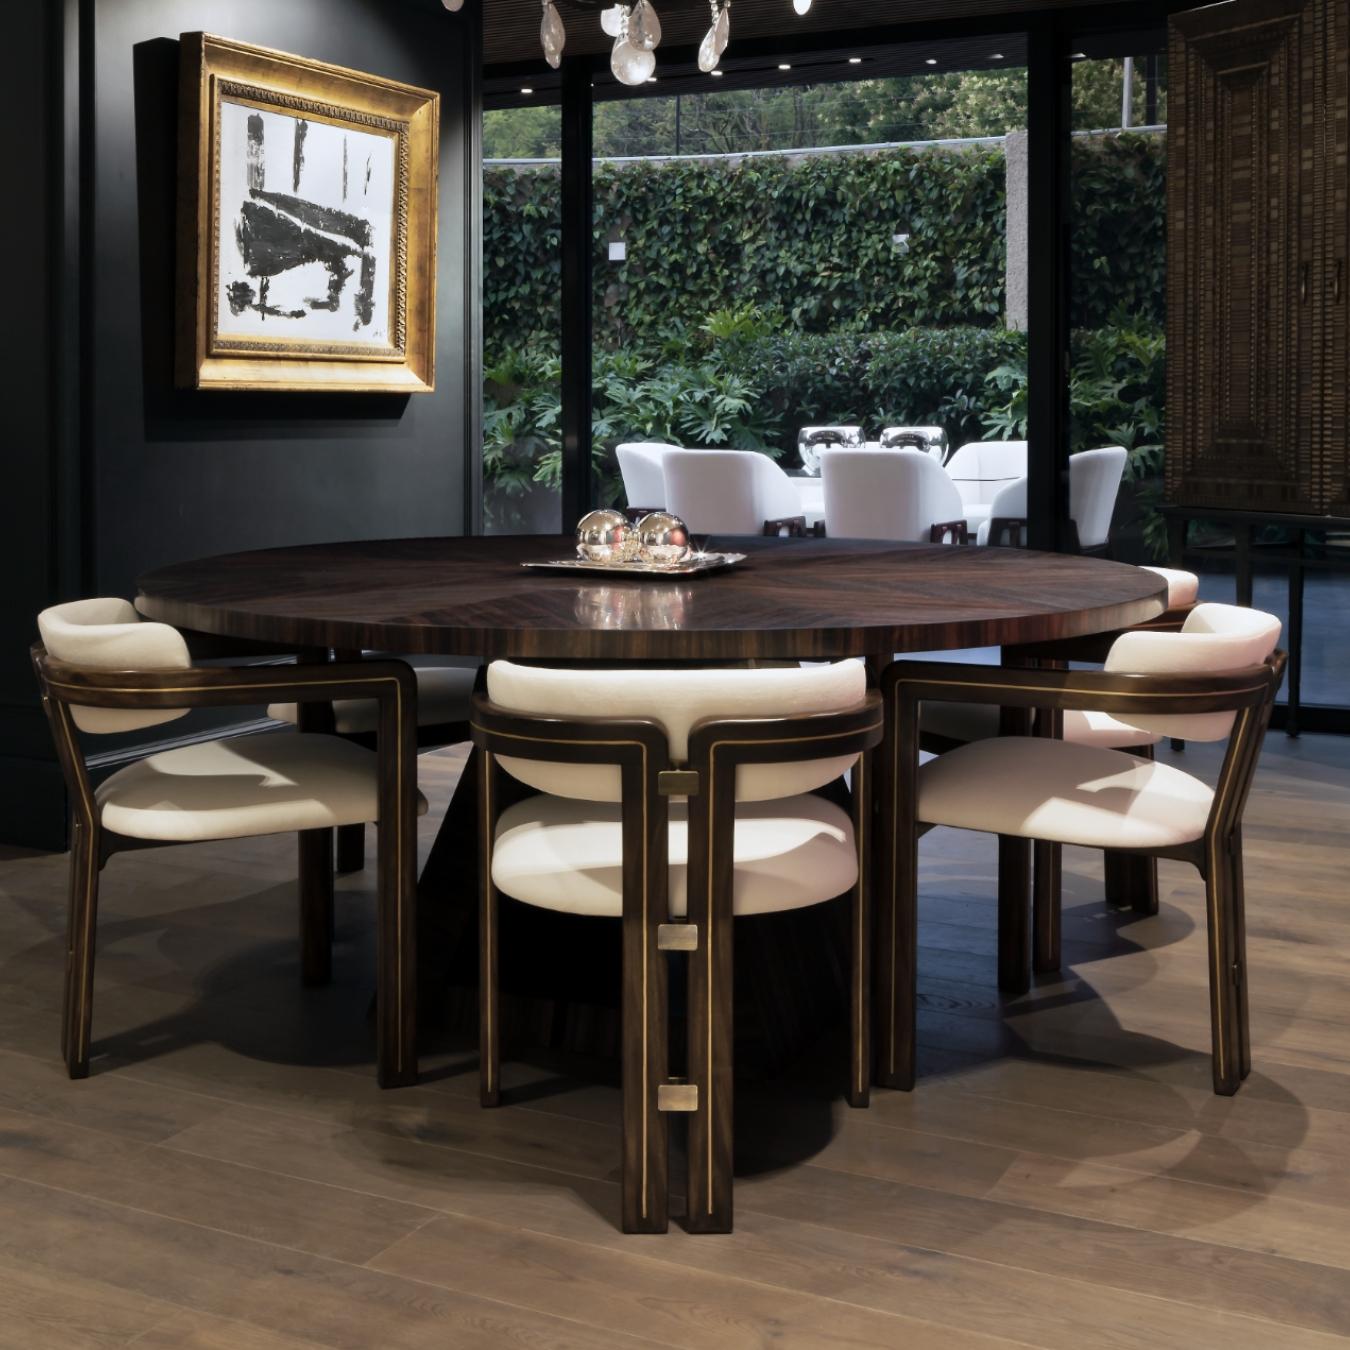 Wood Round Rochelle Dining Table with Ebony Veneer Wax Finish and Brass Details In New Condition For Sale In Bosques de las Lomas, MX